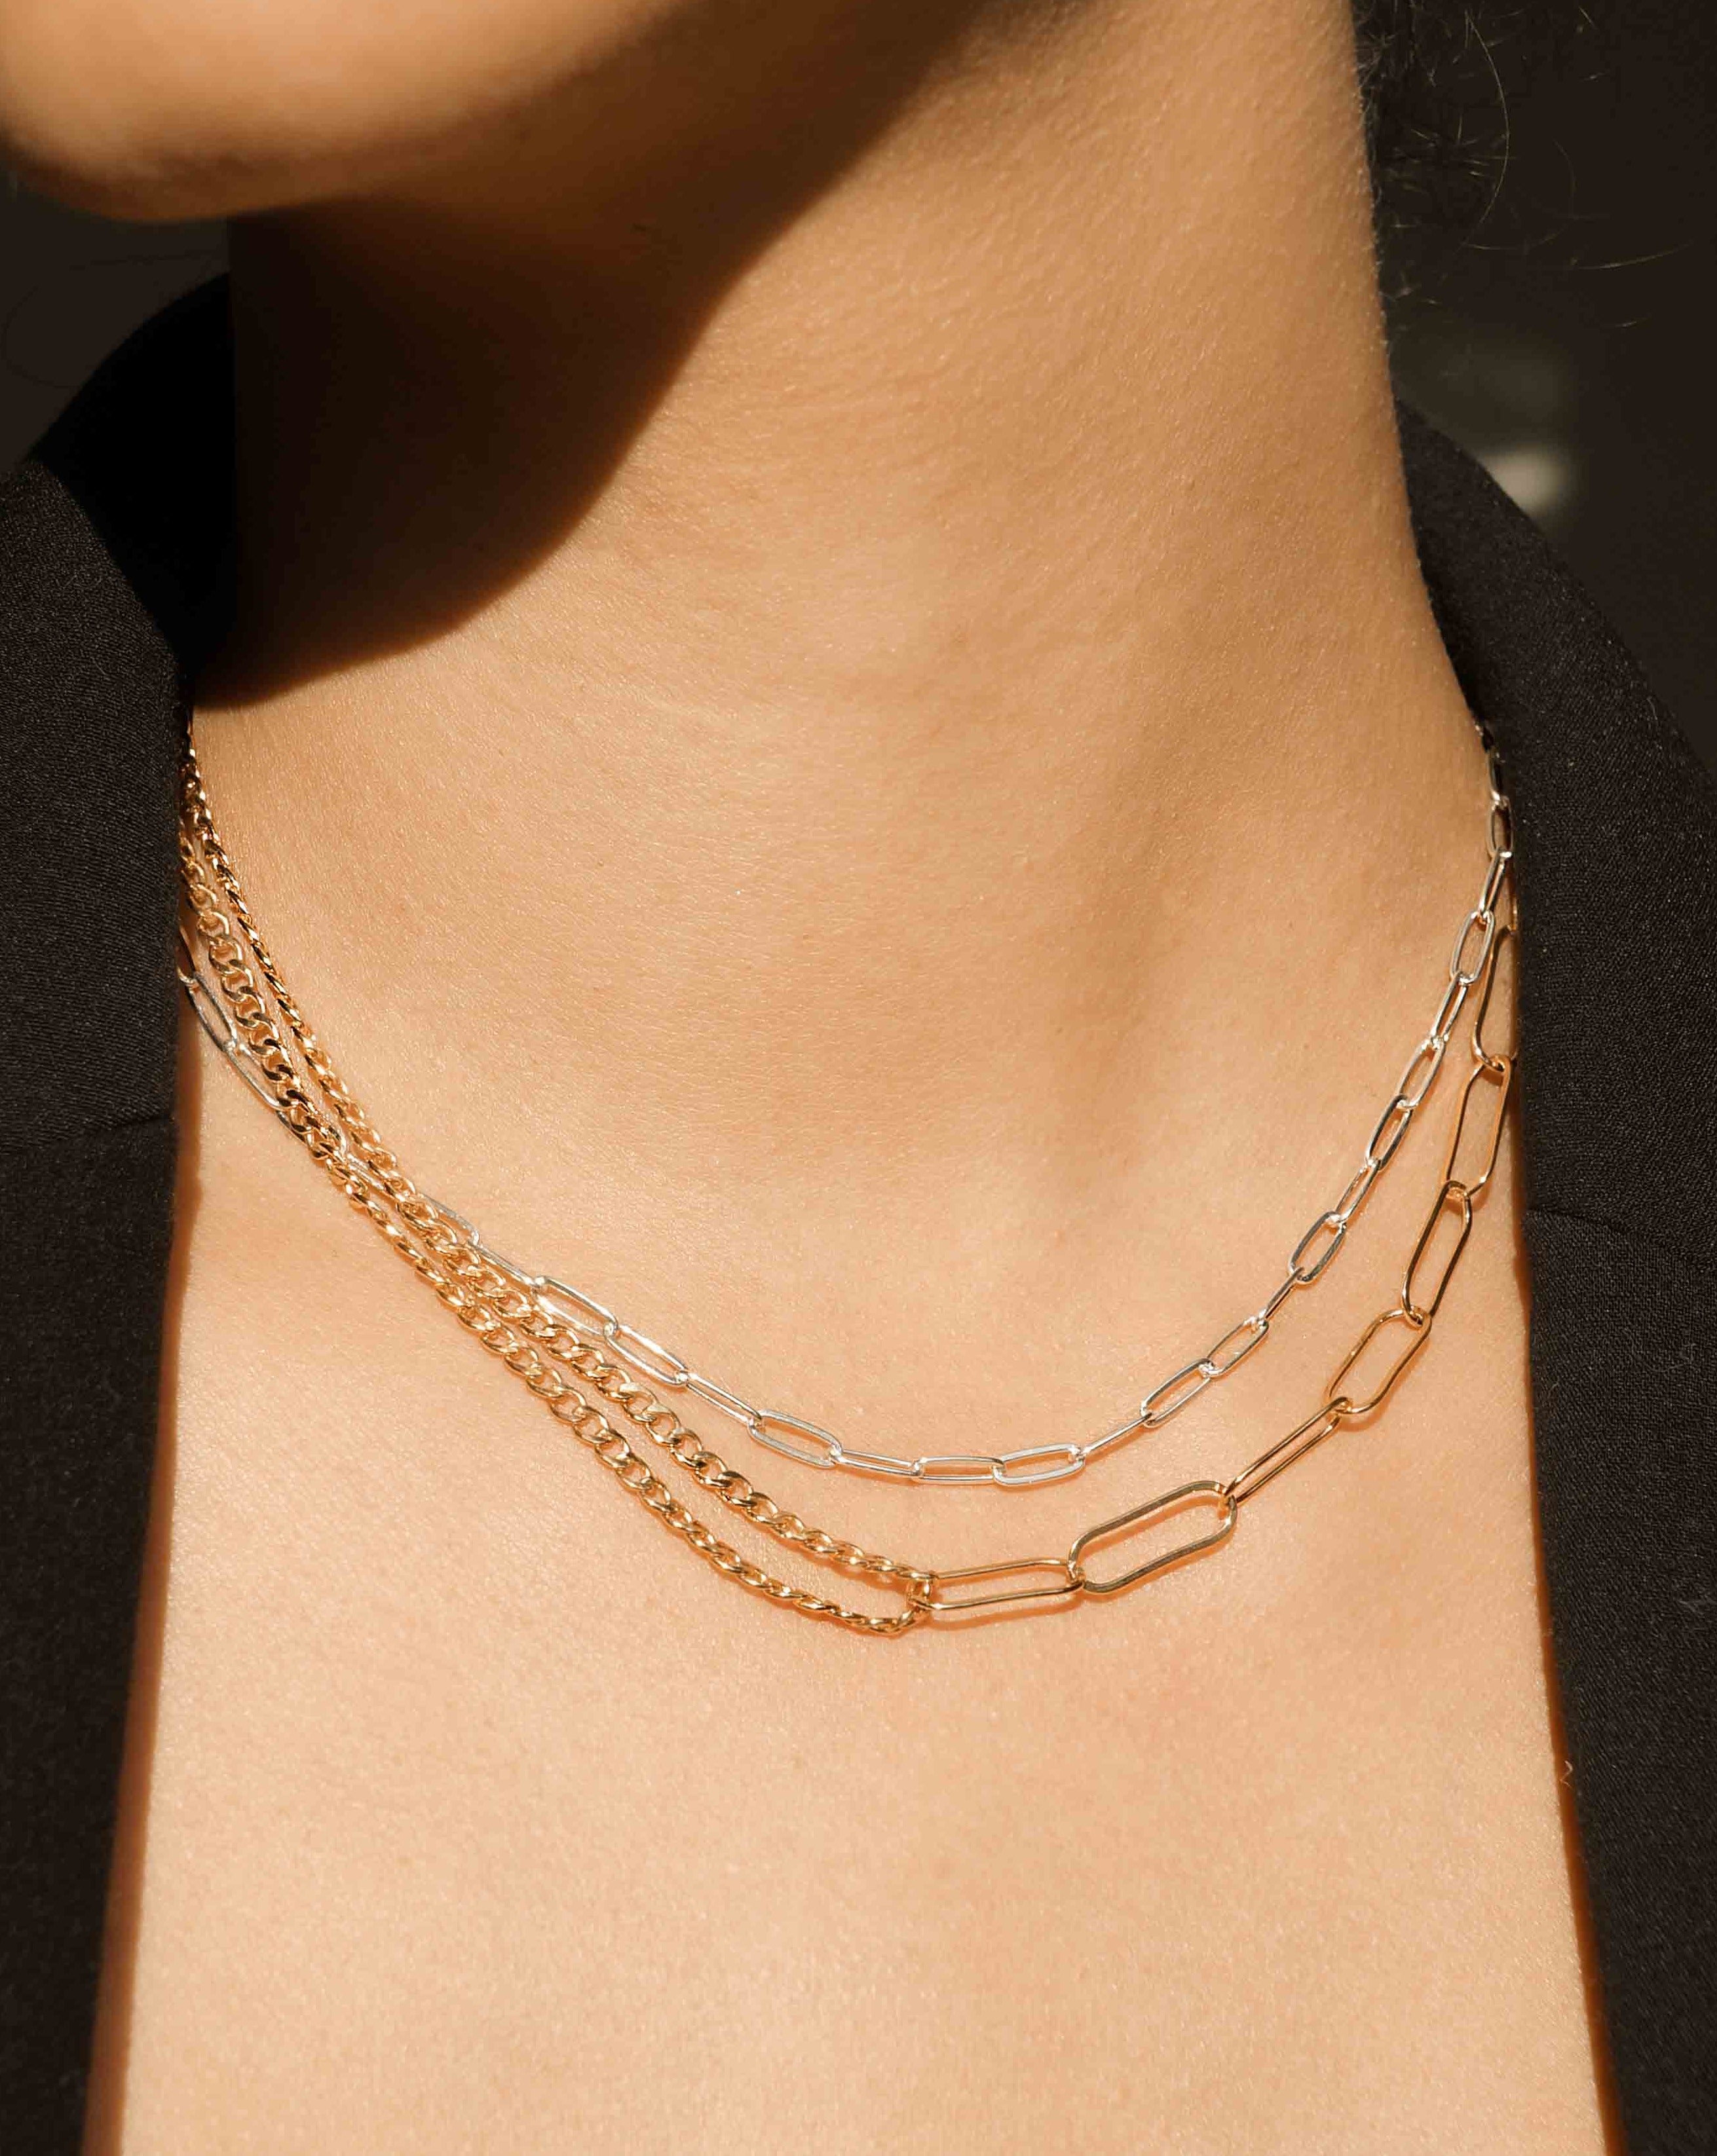 Nora Necklace by KOZAKH. A 14 to 16 inch adjustable length, thin flat link paperclip style chain necklace, crafted in Sterling Silver. 